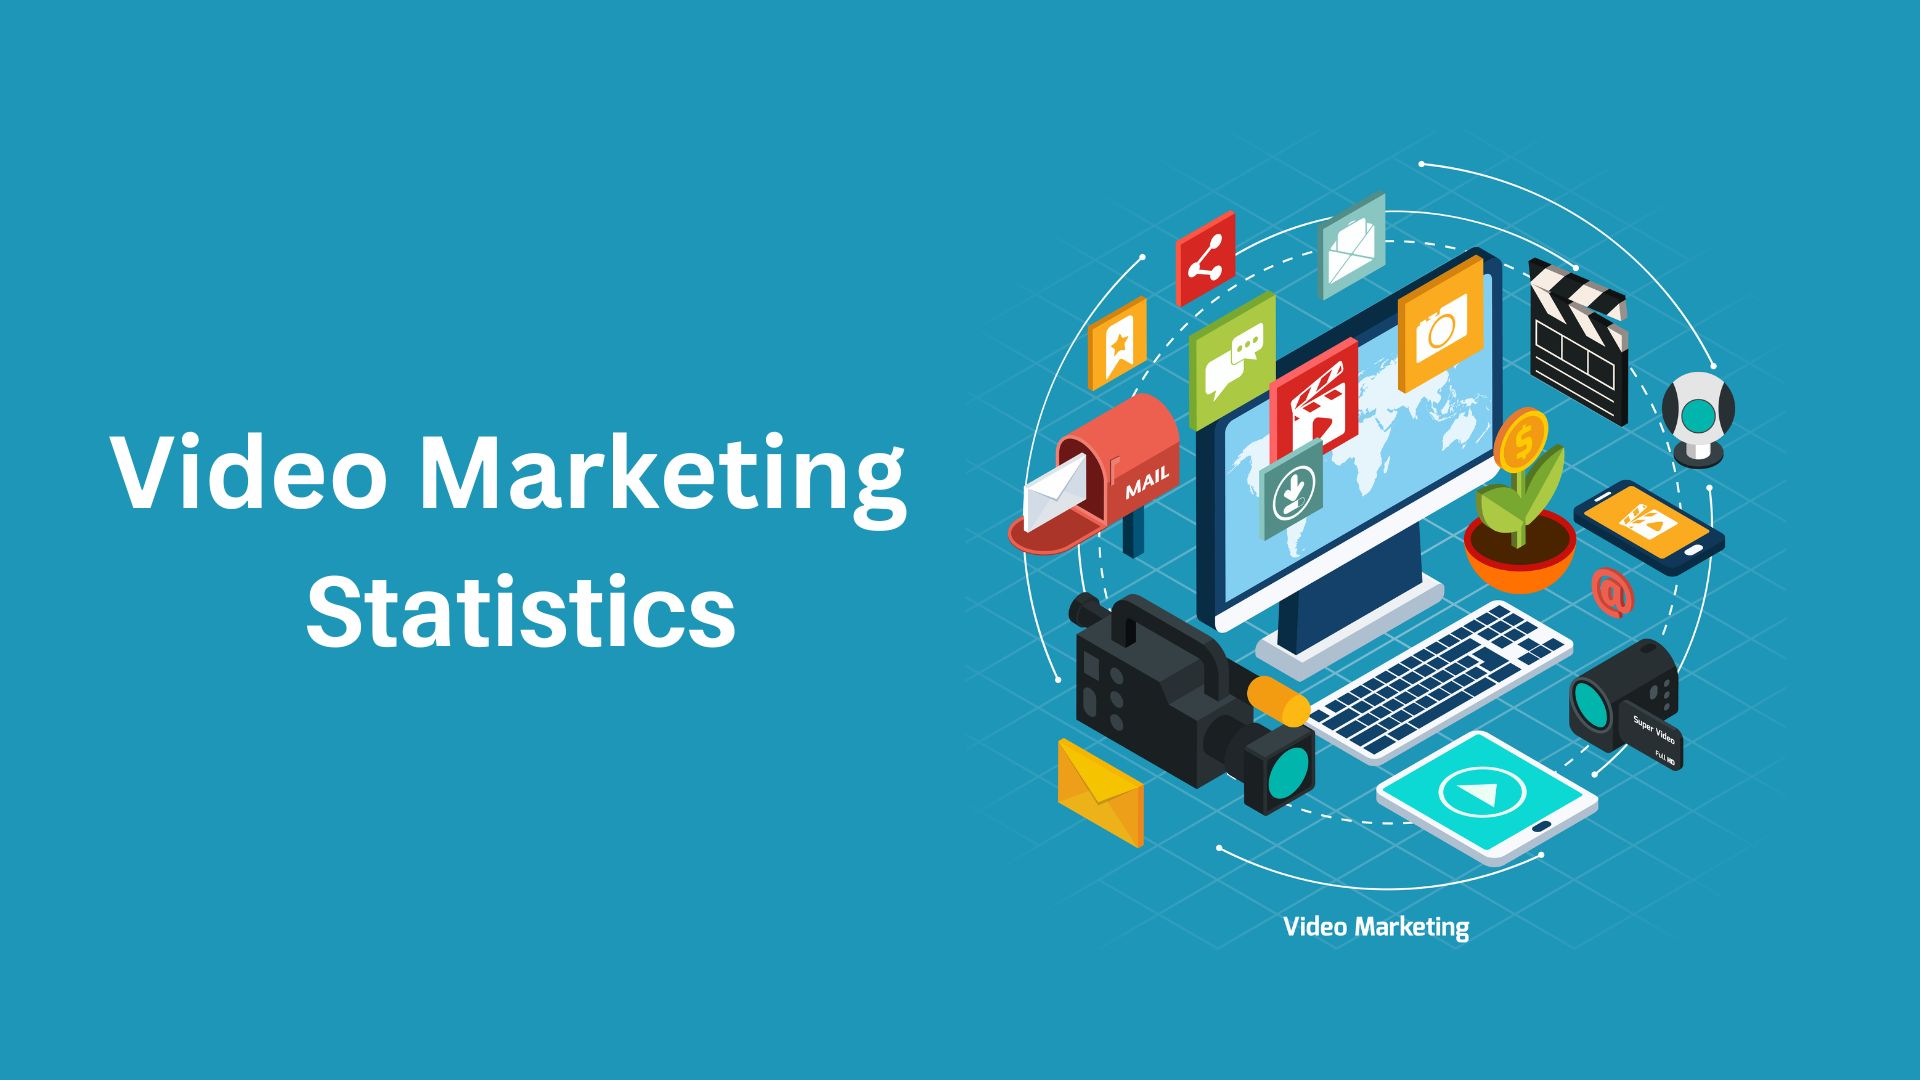 Video Marketing Statistics By Top Platforms Used, Social Media Videos, Preferred Content Marketing Type, Average Spending on video, Customer Preferences, Behavior and Types of Videos